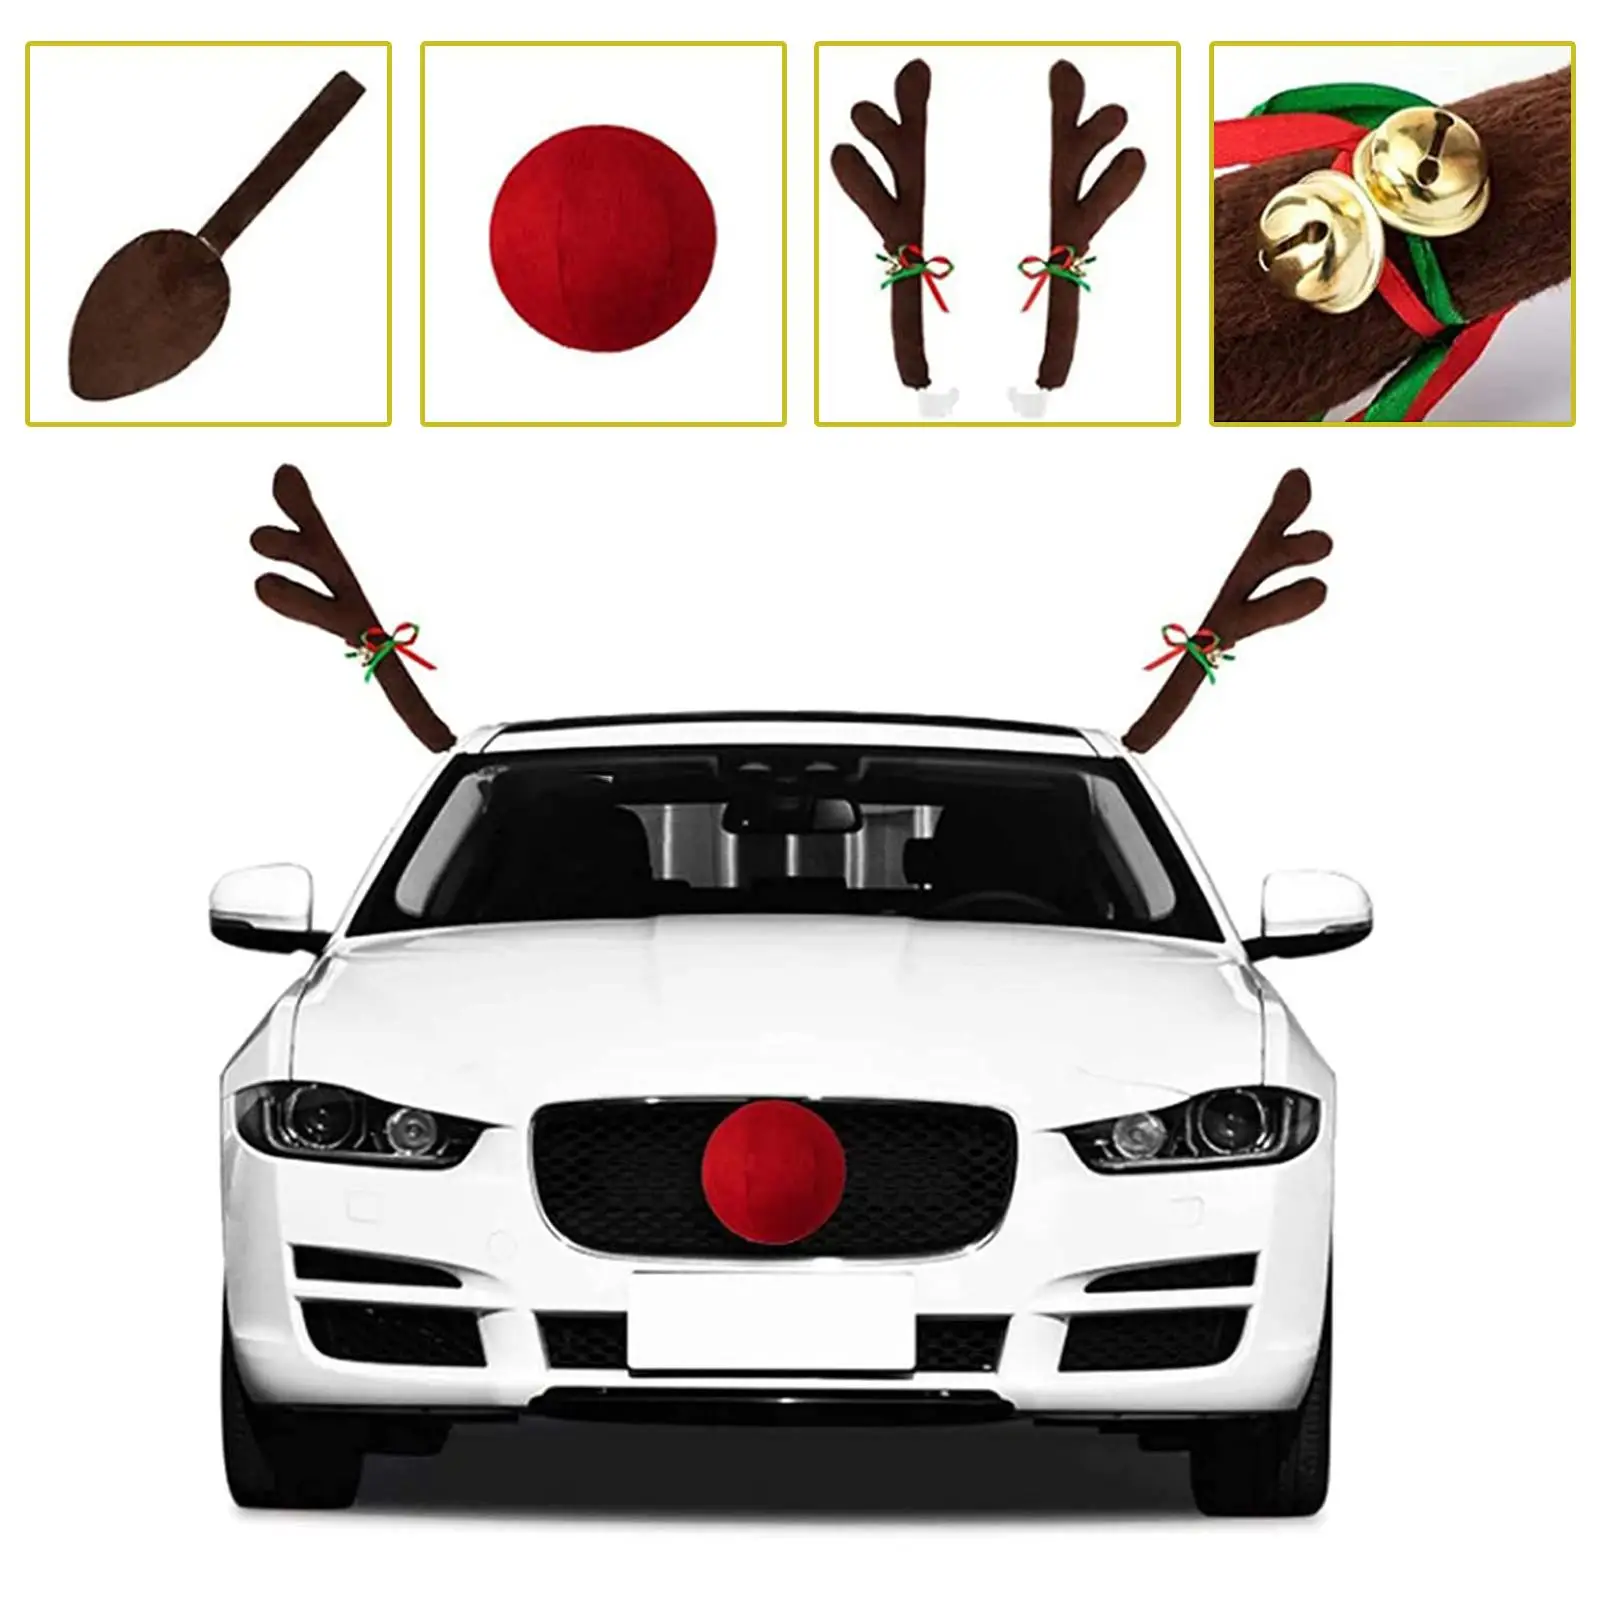 Car Reindeer Christmas Decoration Antlers & Nose Car Costume Auto Accessories Auto Reindeer and Red Nose Set for Truck SUV